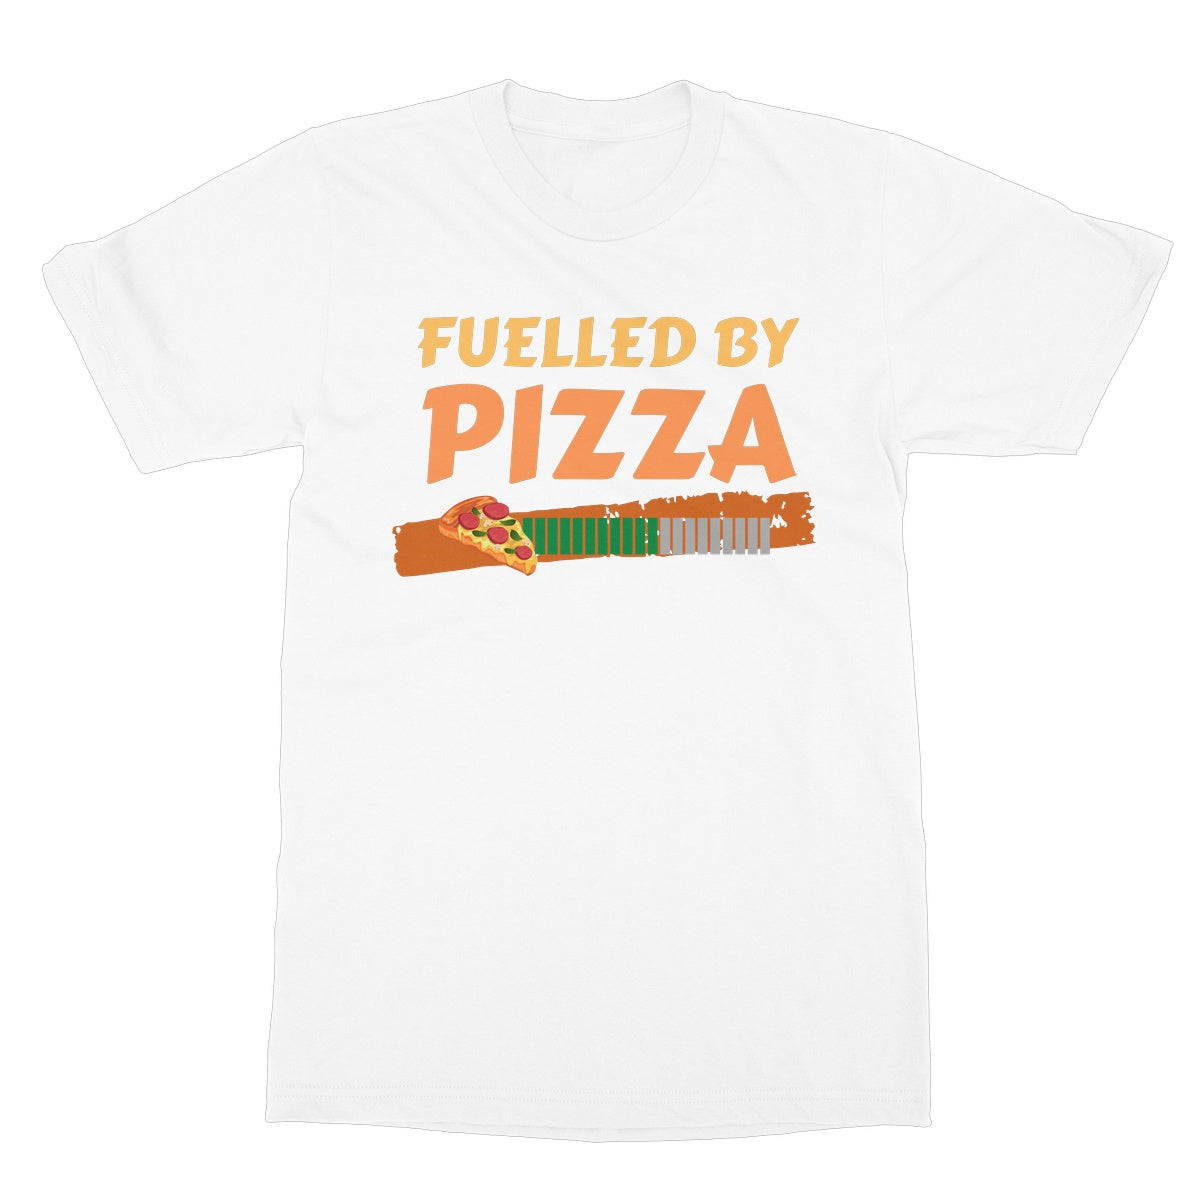 fuelled by pizza t shirt white